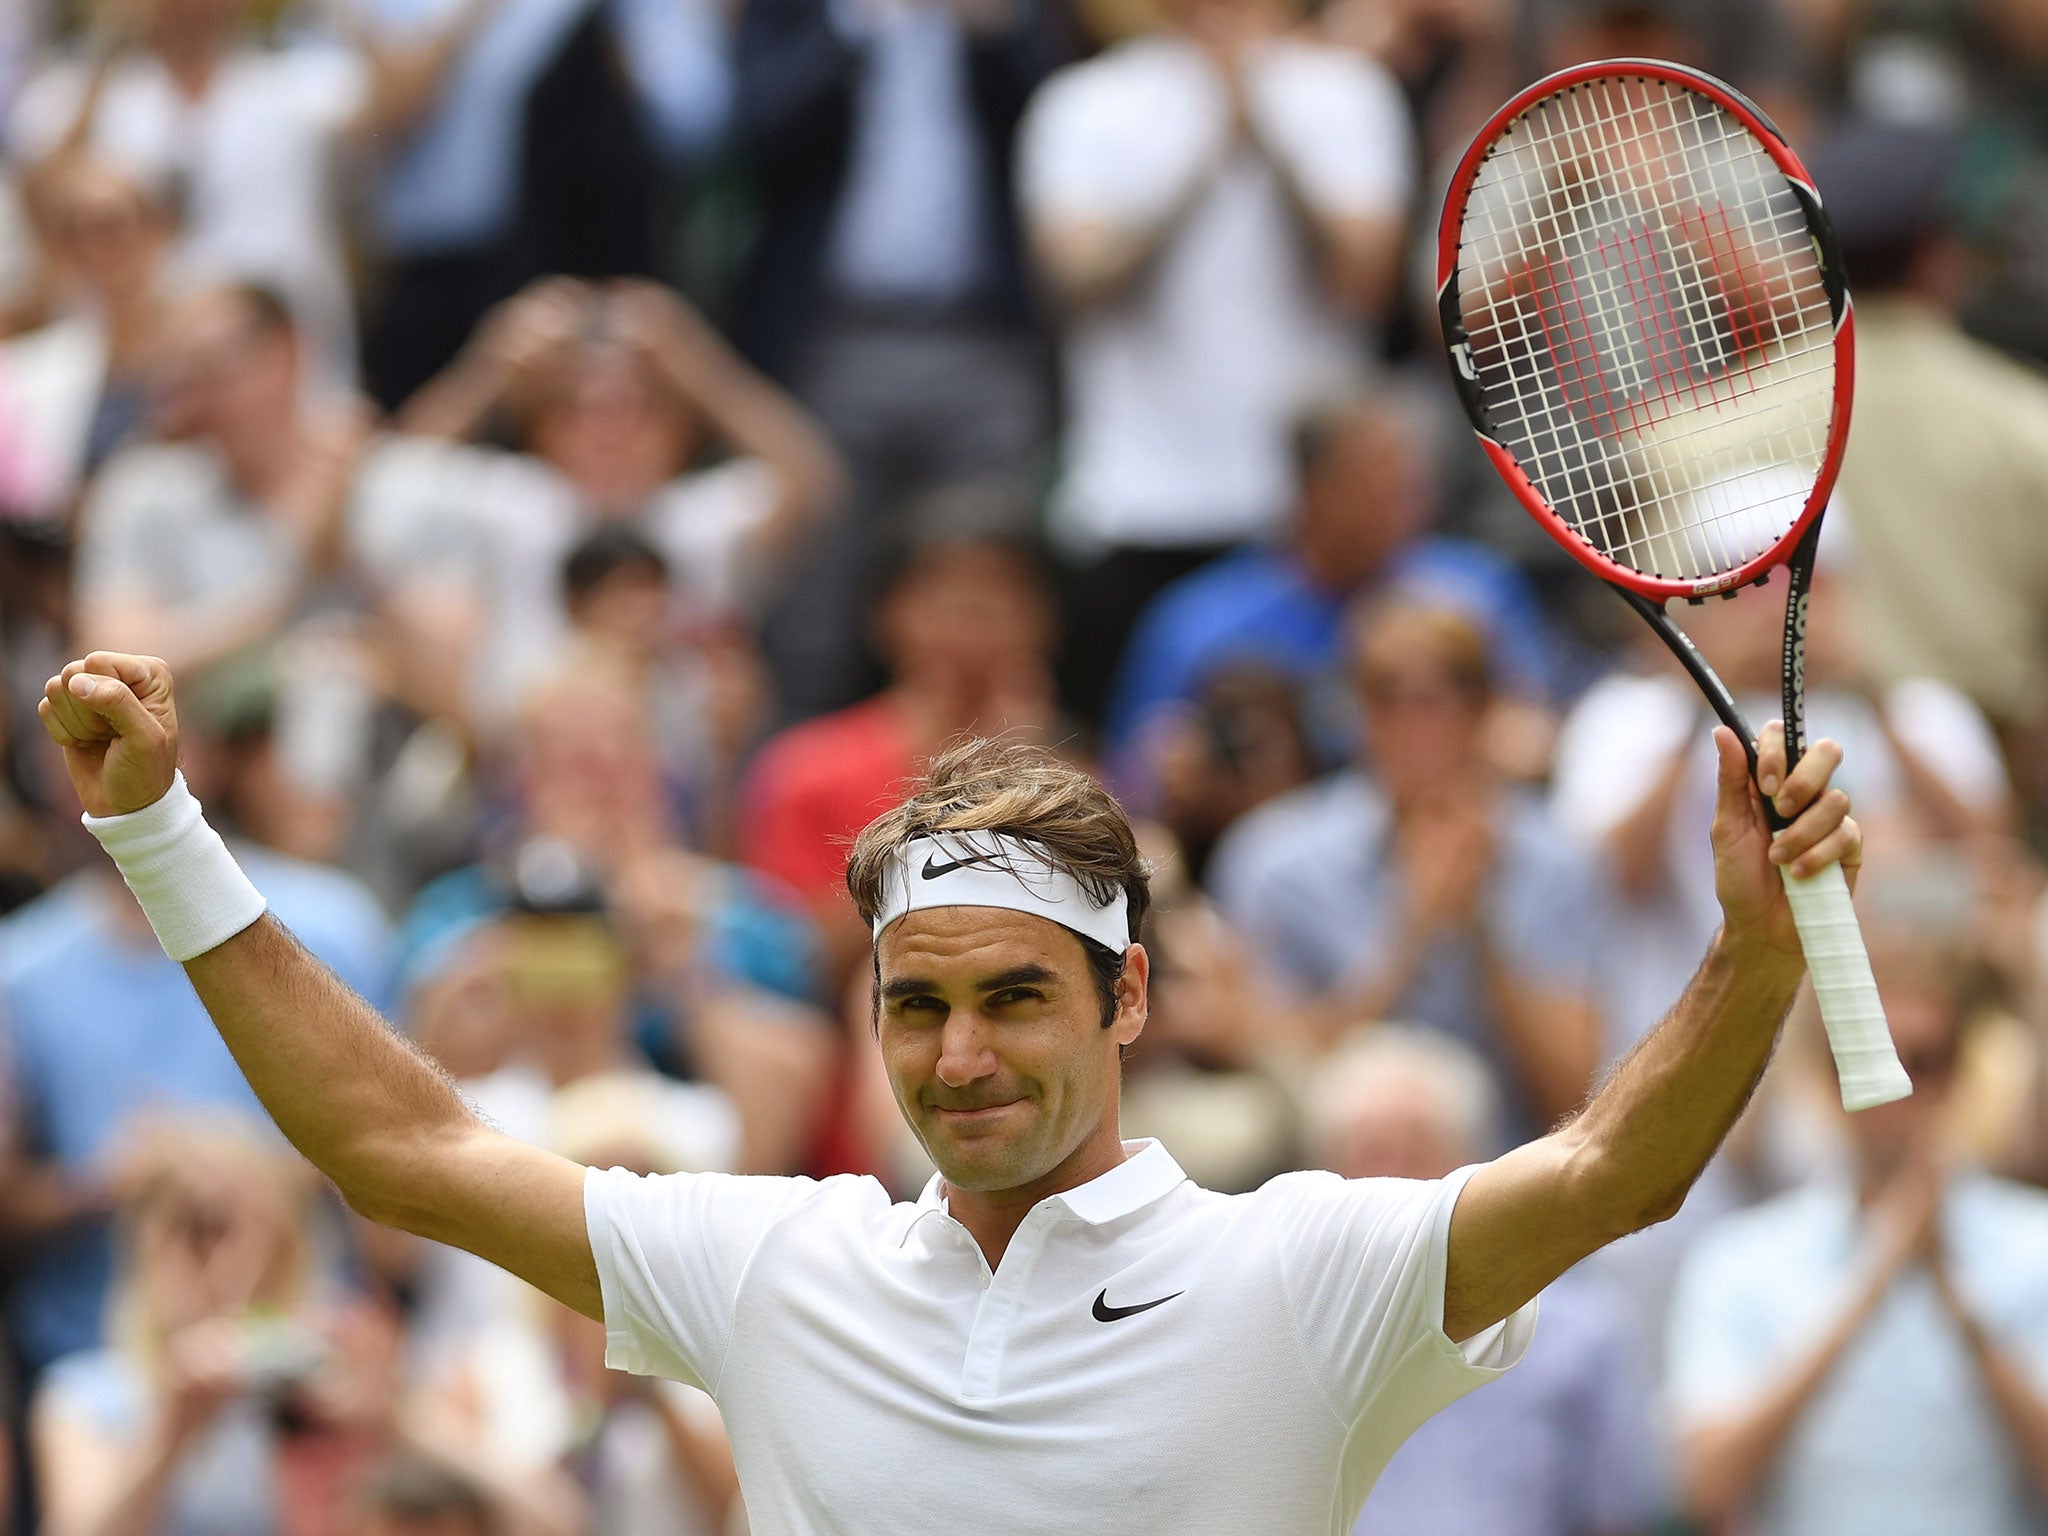 Roger Federer has yet to drop a set at this year's Wimbledon